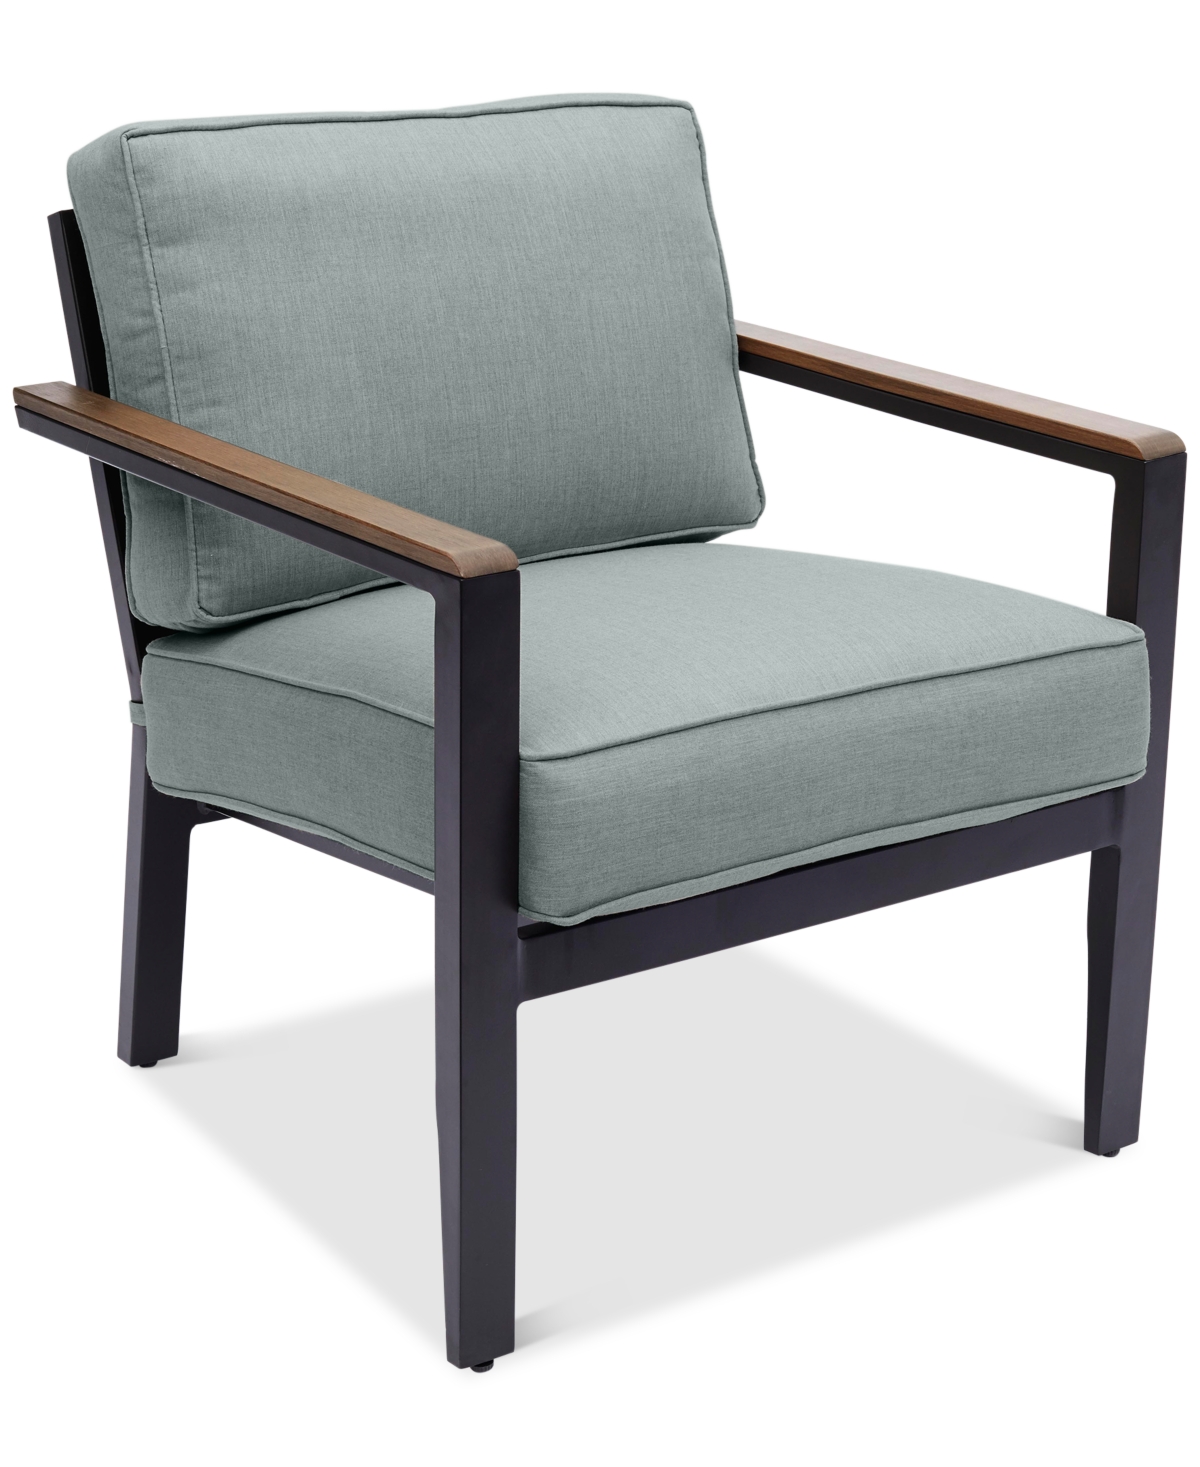 Stockholm Outdoor Club Chair with Outdura Cushions, Created for Macys